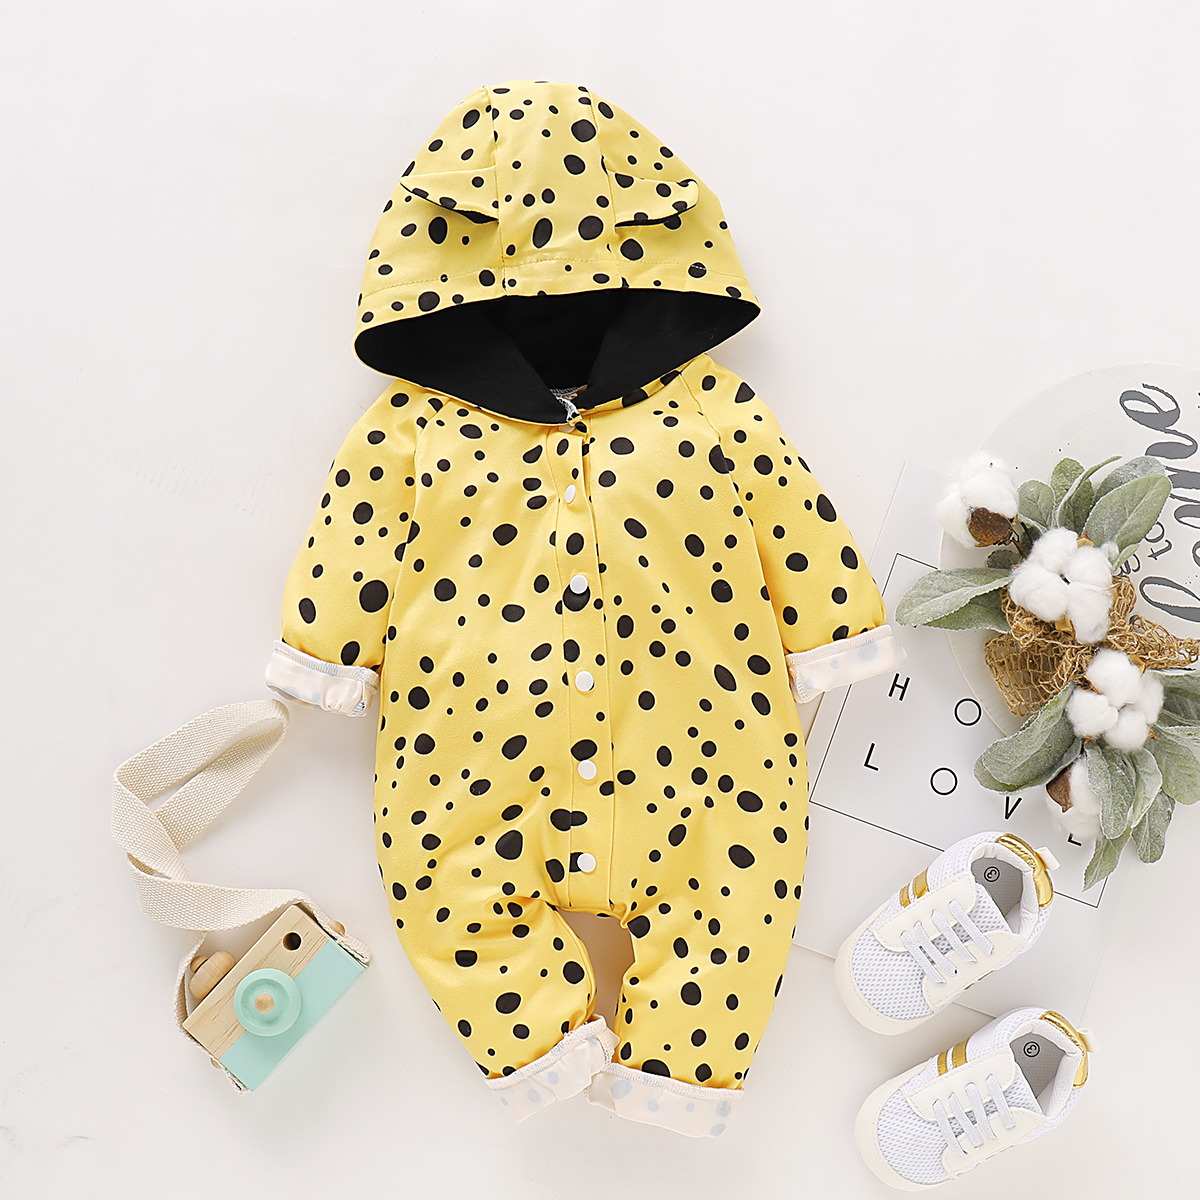 Baby Bright Style Polka Dots Cardigan Design Hooded Long-sleeve Jumpsuit